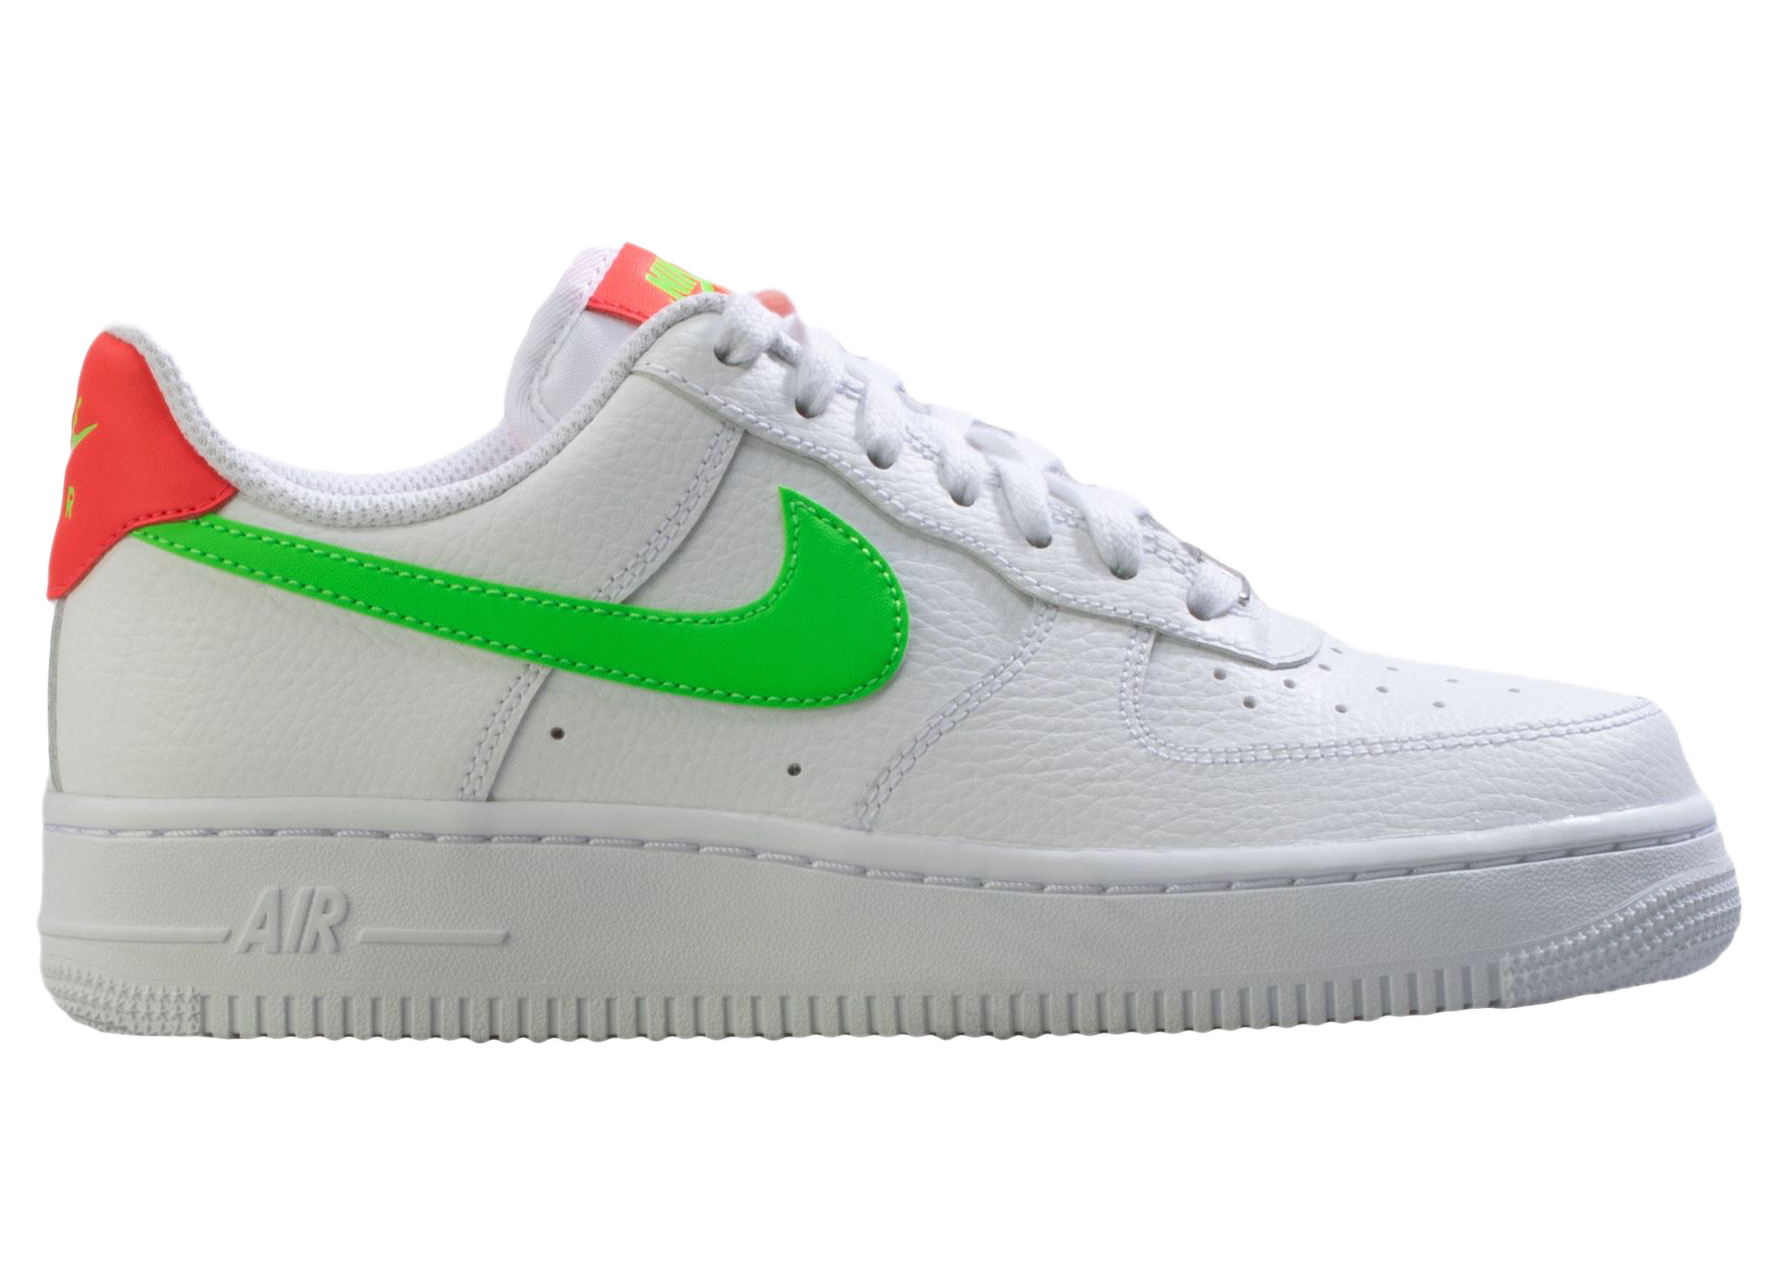 Nike Air Force 1 Low Watermelon (Women's) - CT4328-100 - US